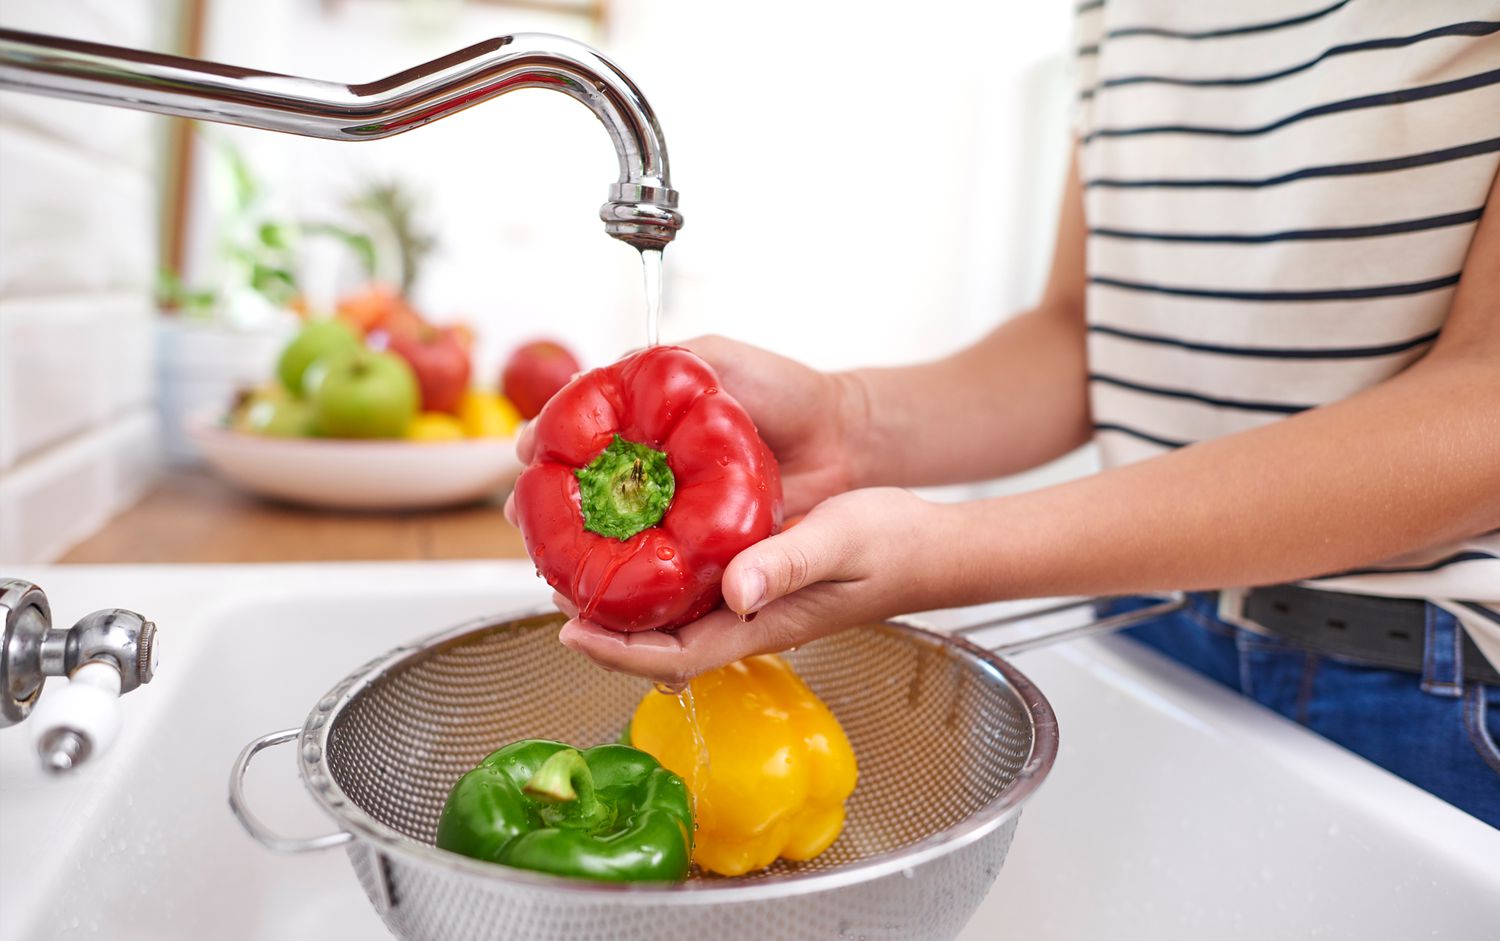 How to Wash Fruits and Vegetables | Better Homes & Gardens